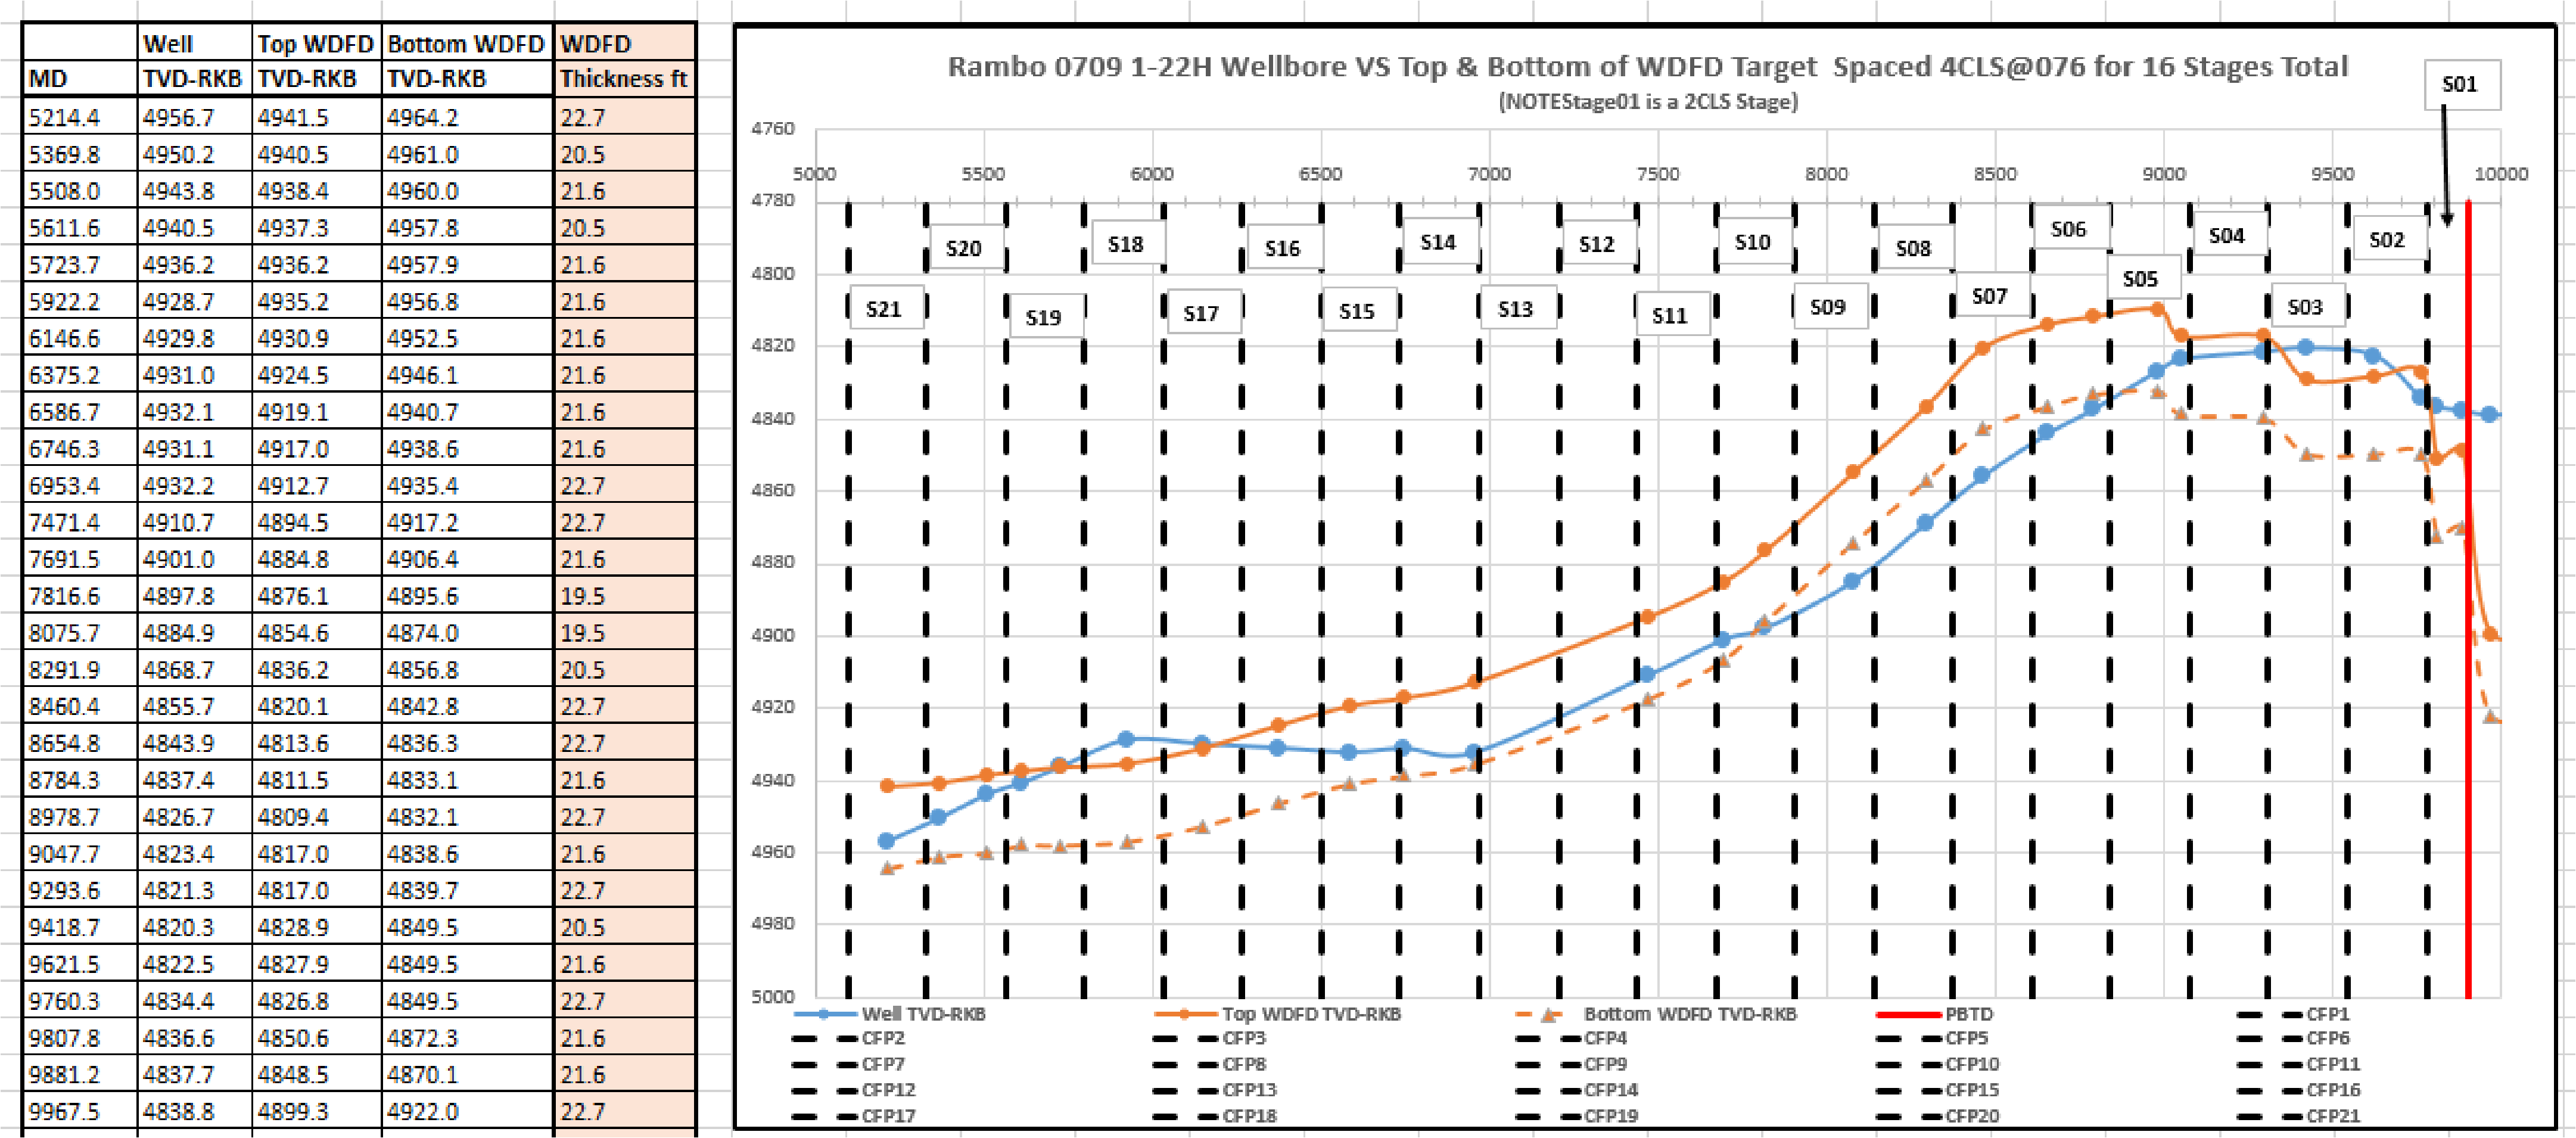 Rambo 0709 1-22H Wellbore vs Top and Bottom of WDFD Target Spaced 4CLS@076 for 16 Stage totals